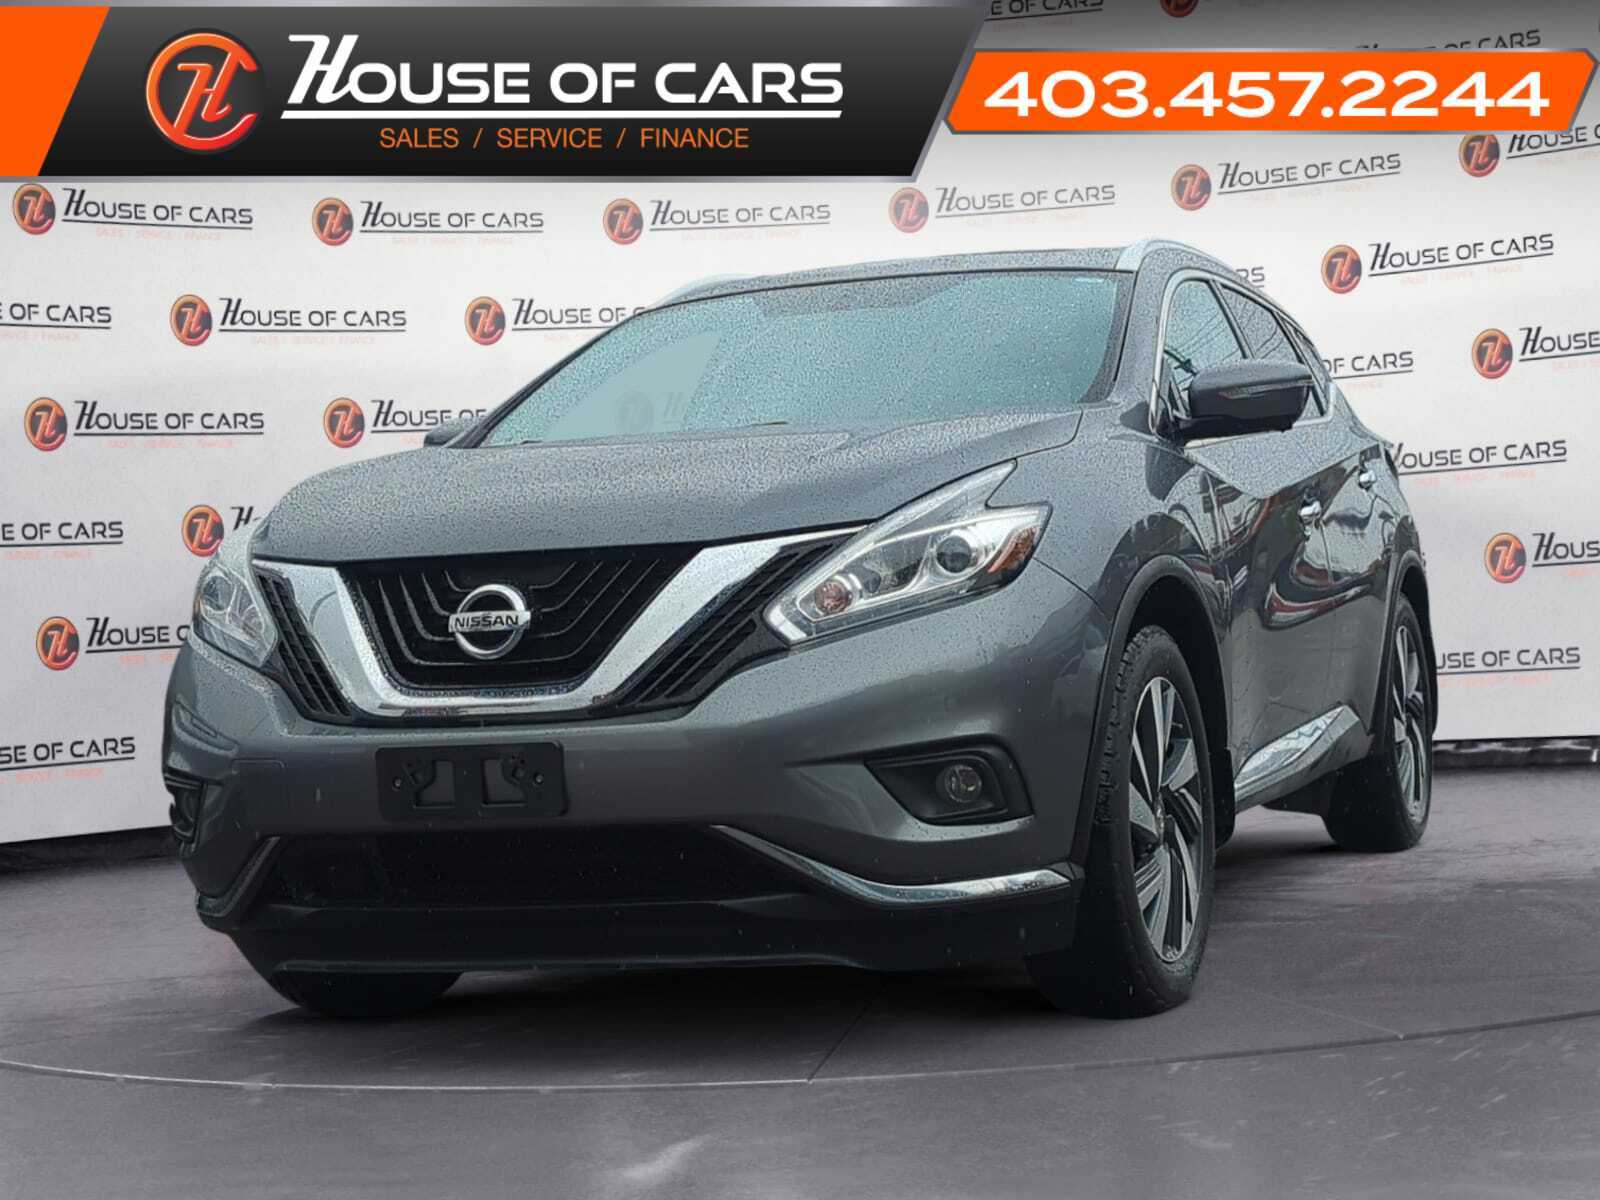 2015 Nissan Murano AWD 4dr Platinum Leather Seats Panoramic roof